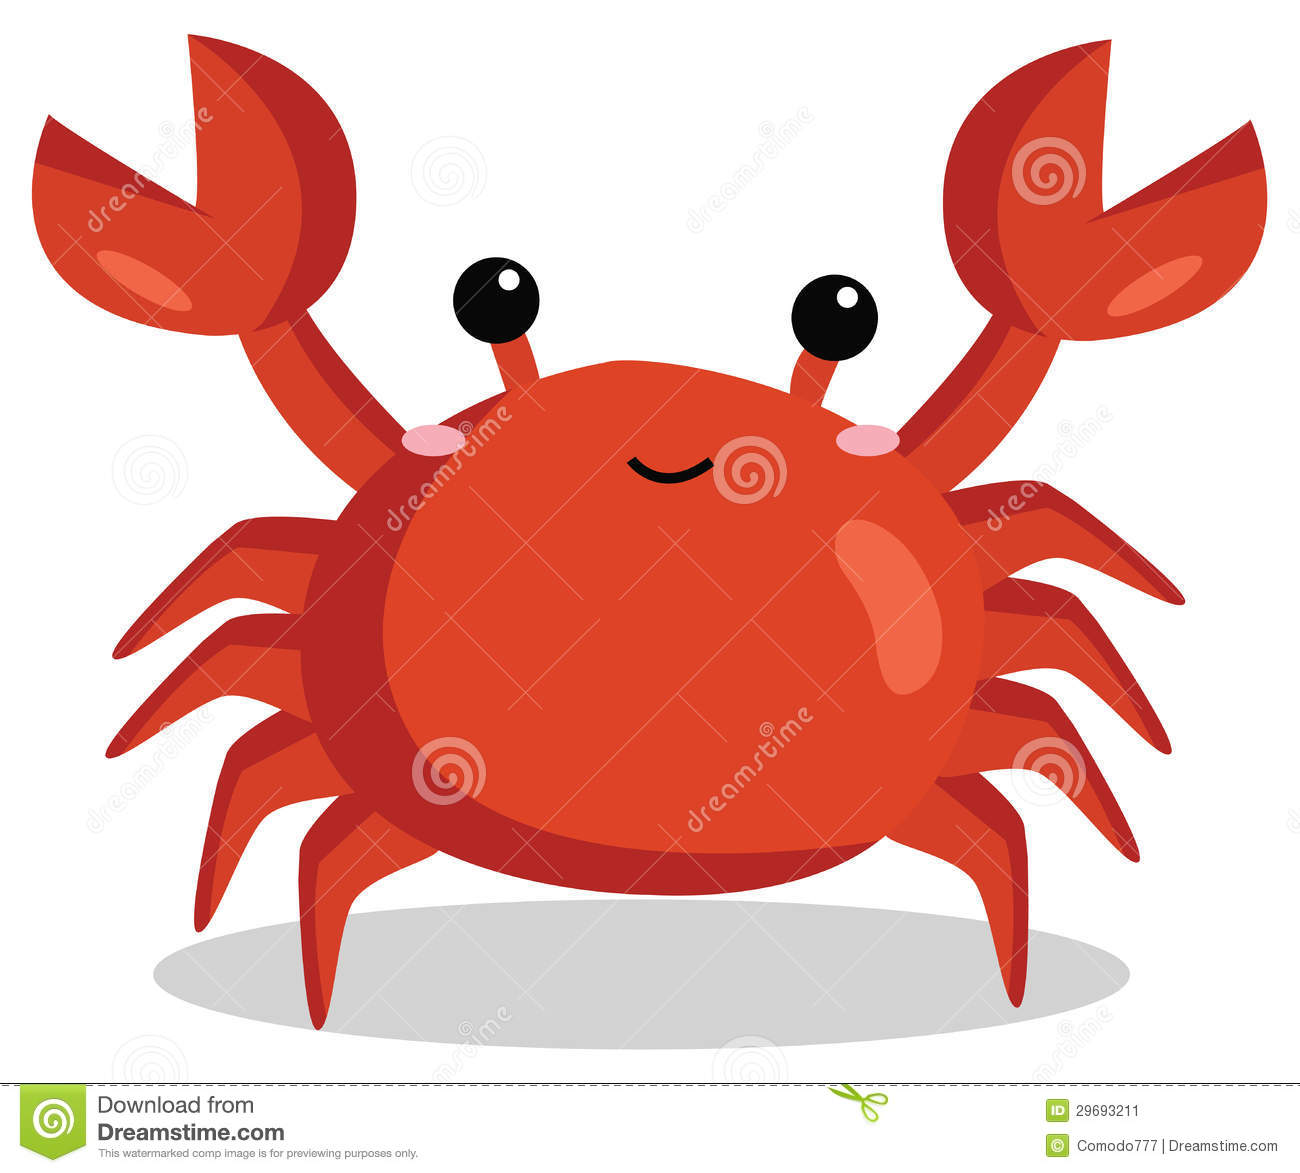 Ghost Crab clipart #8, Download drawings